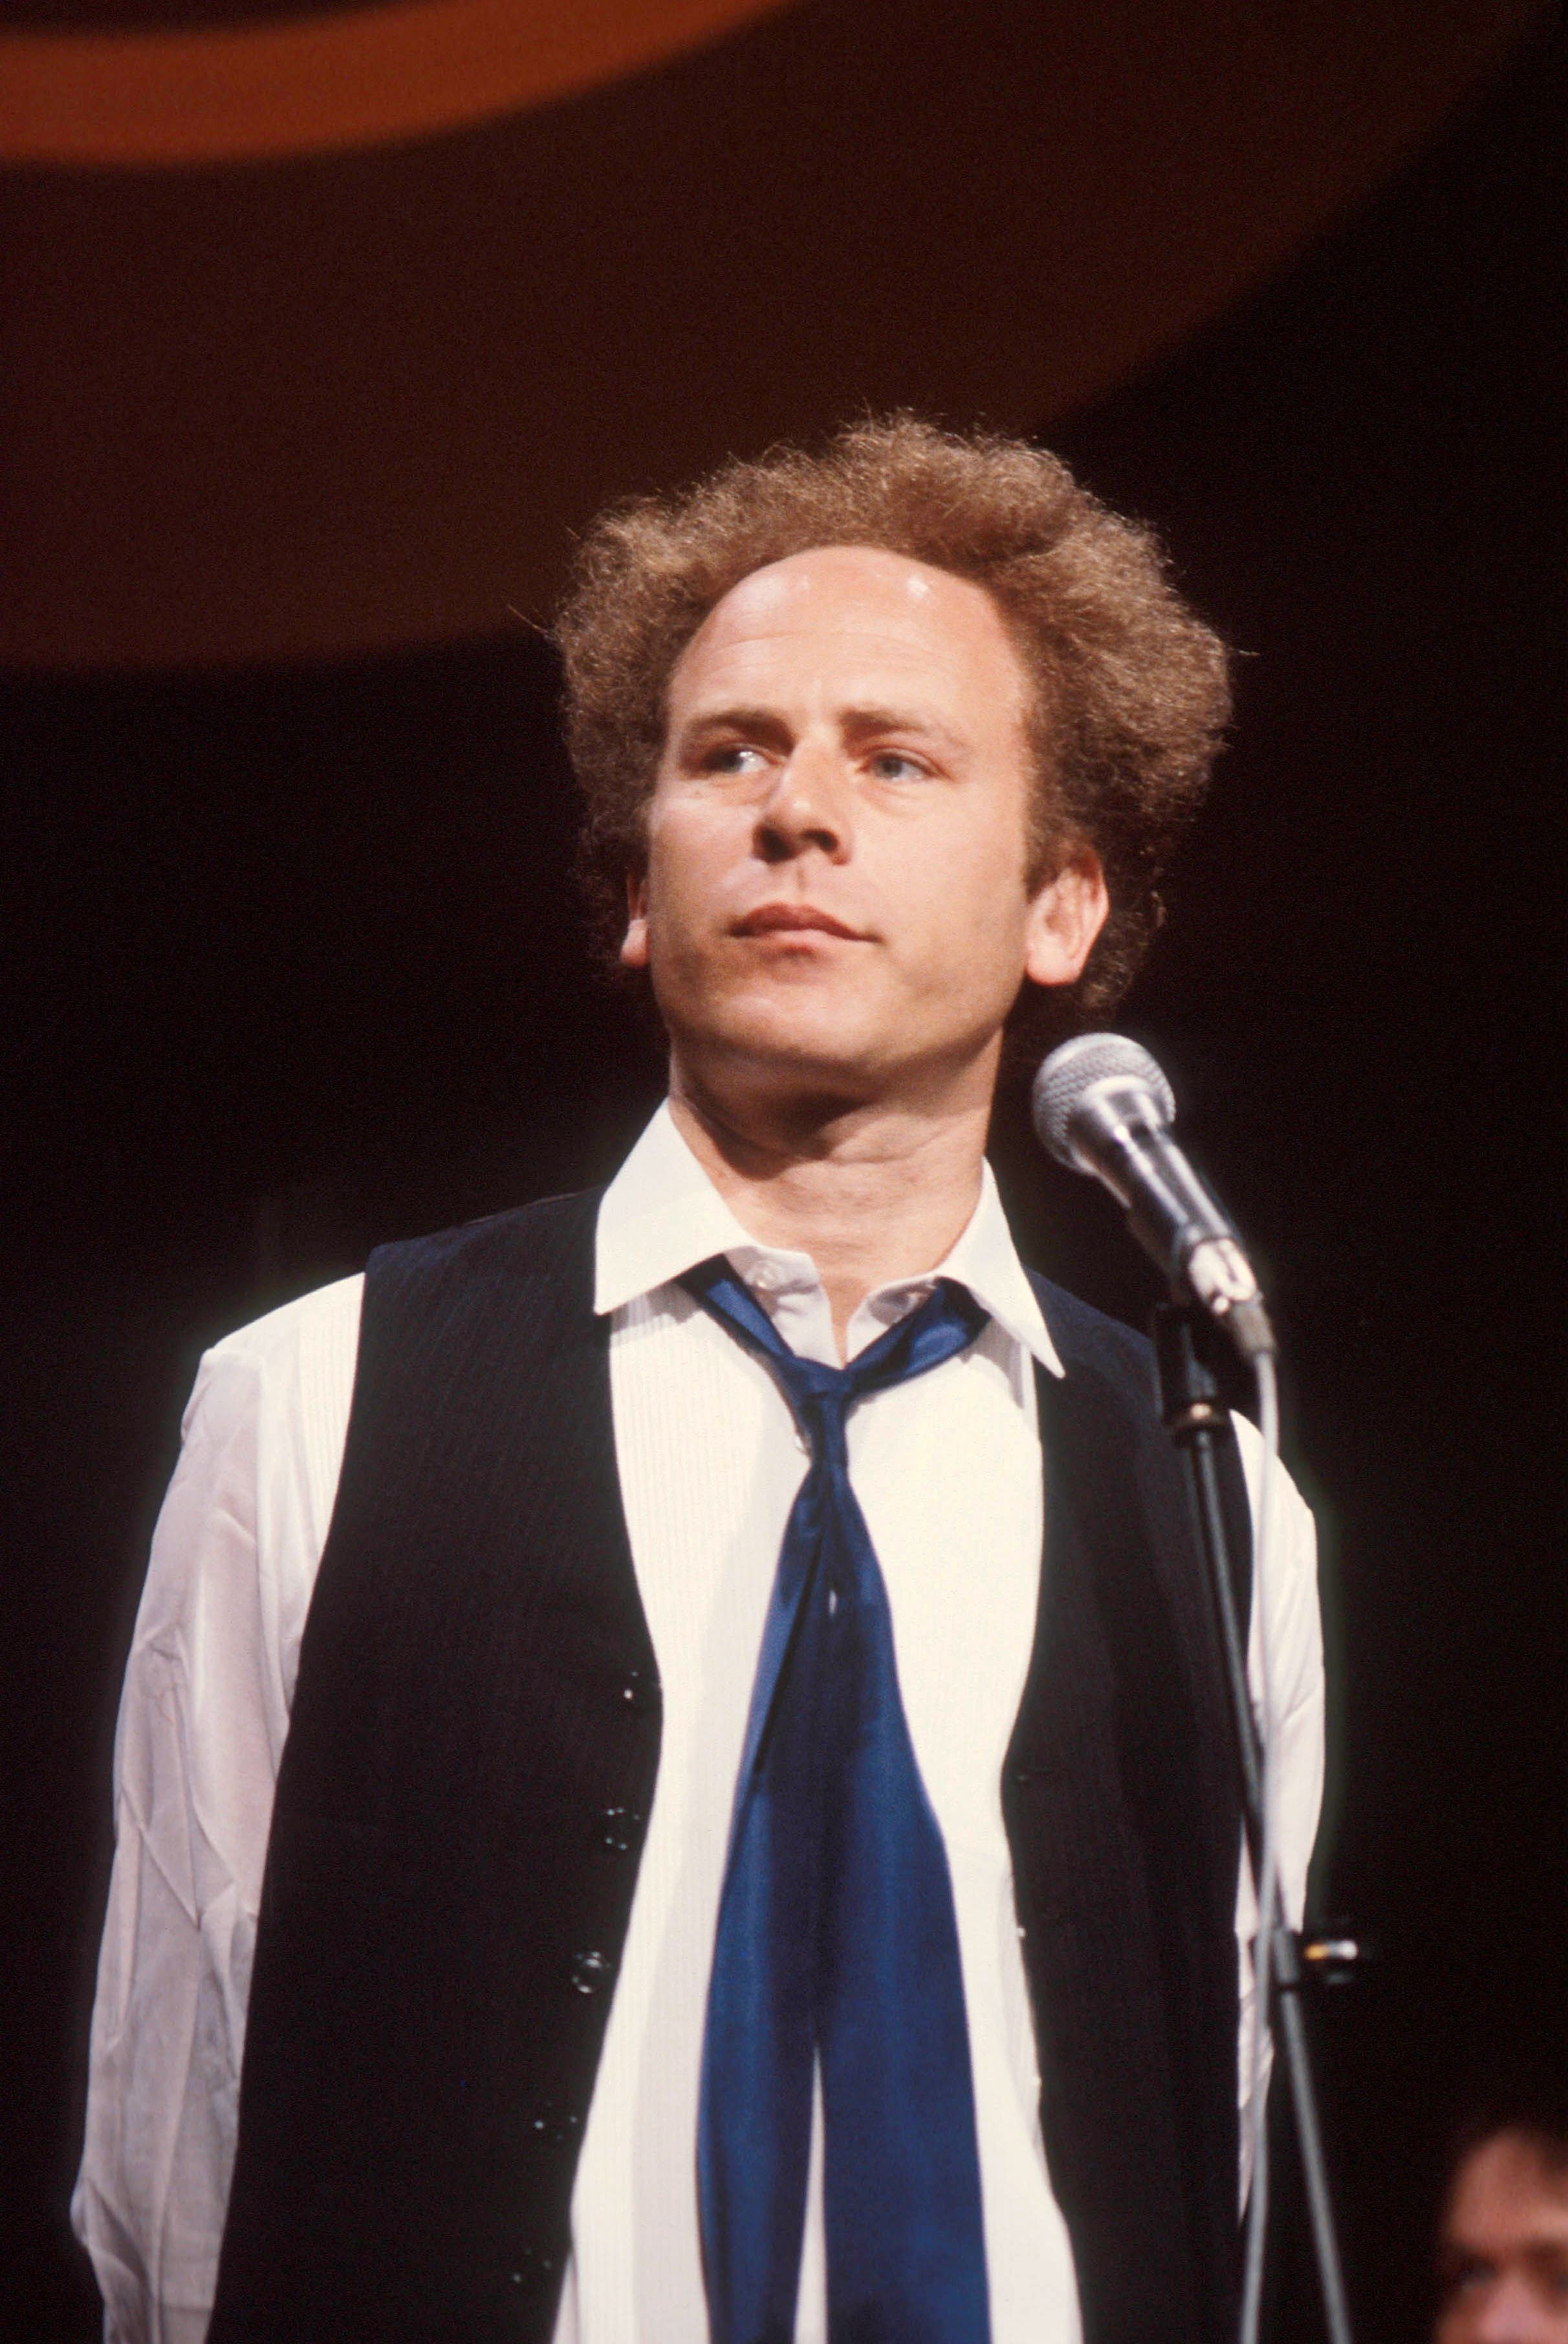 Art Garfunkel performs on a TV show, circa 1975. | Photo: Getty Images